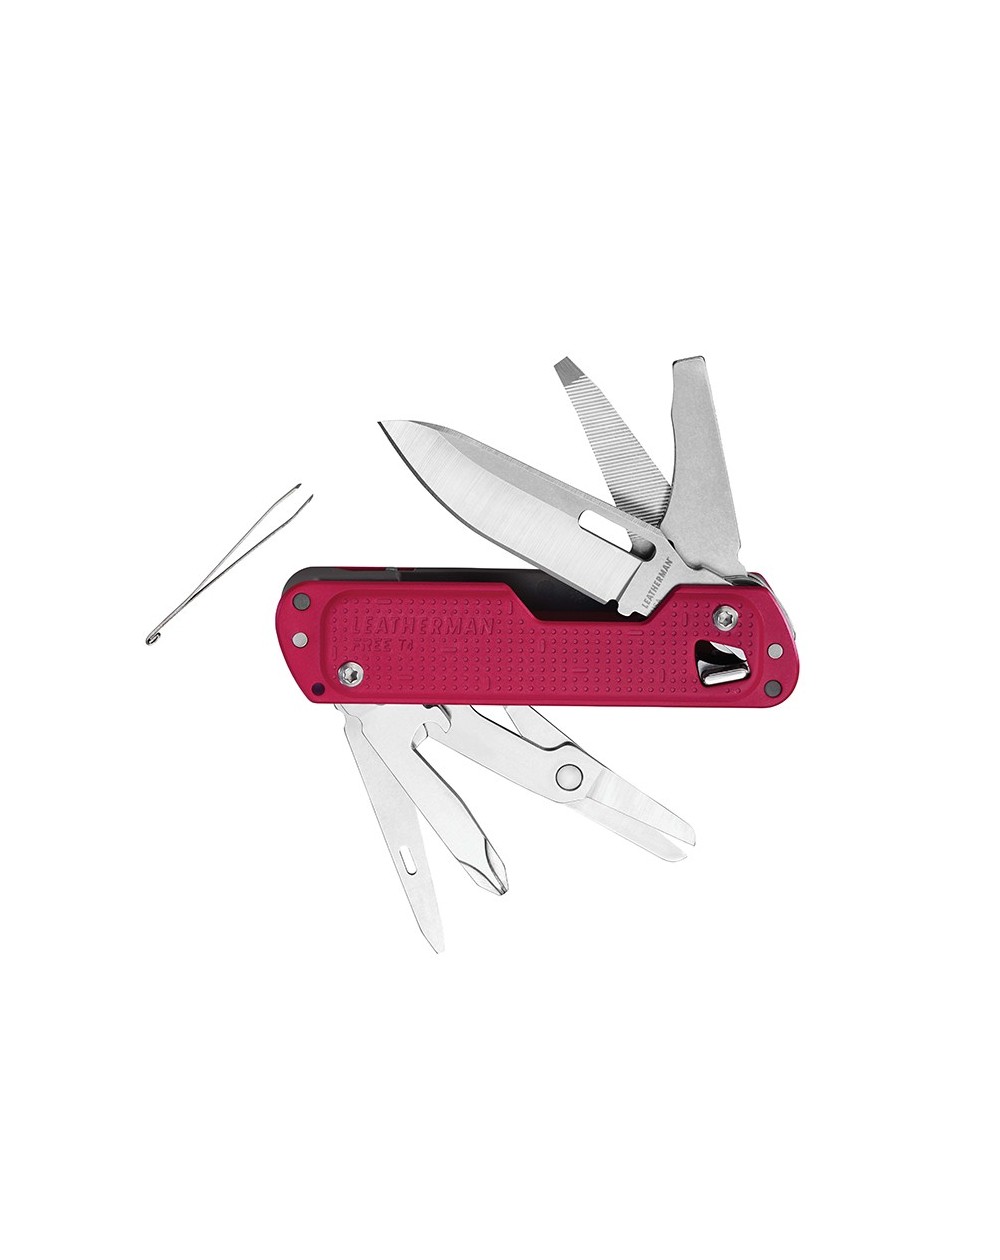 leatherman-pince-multifonctions-free-t4-rouge-832871-1